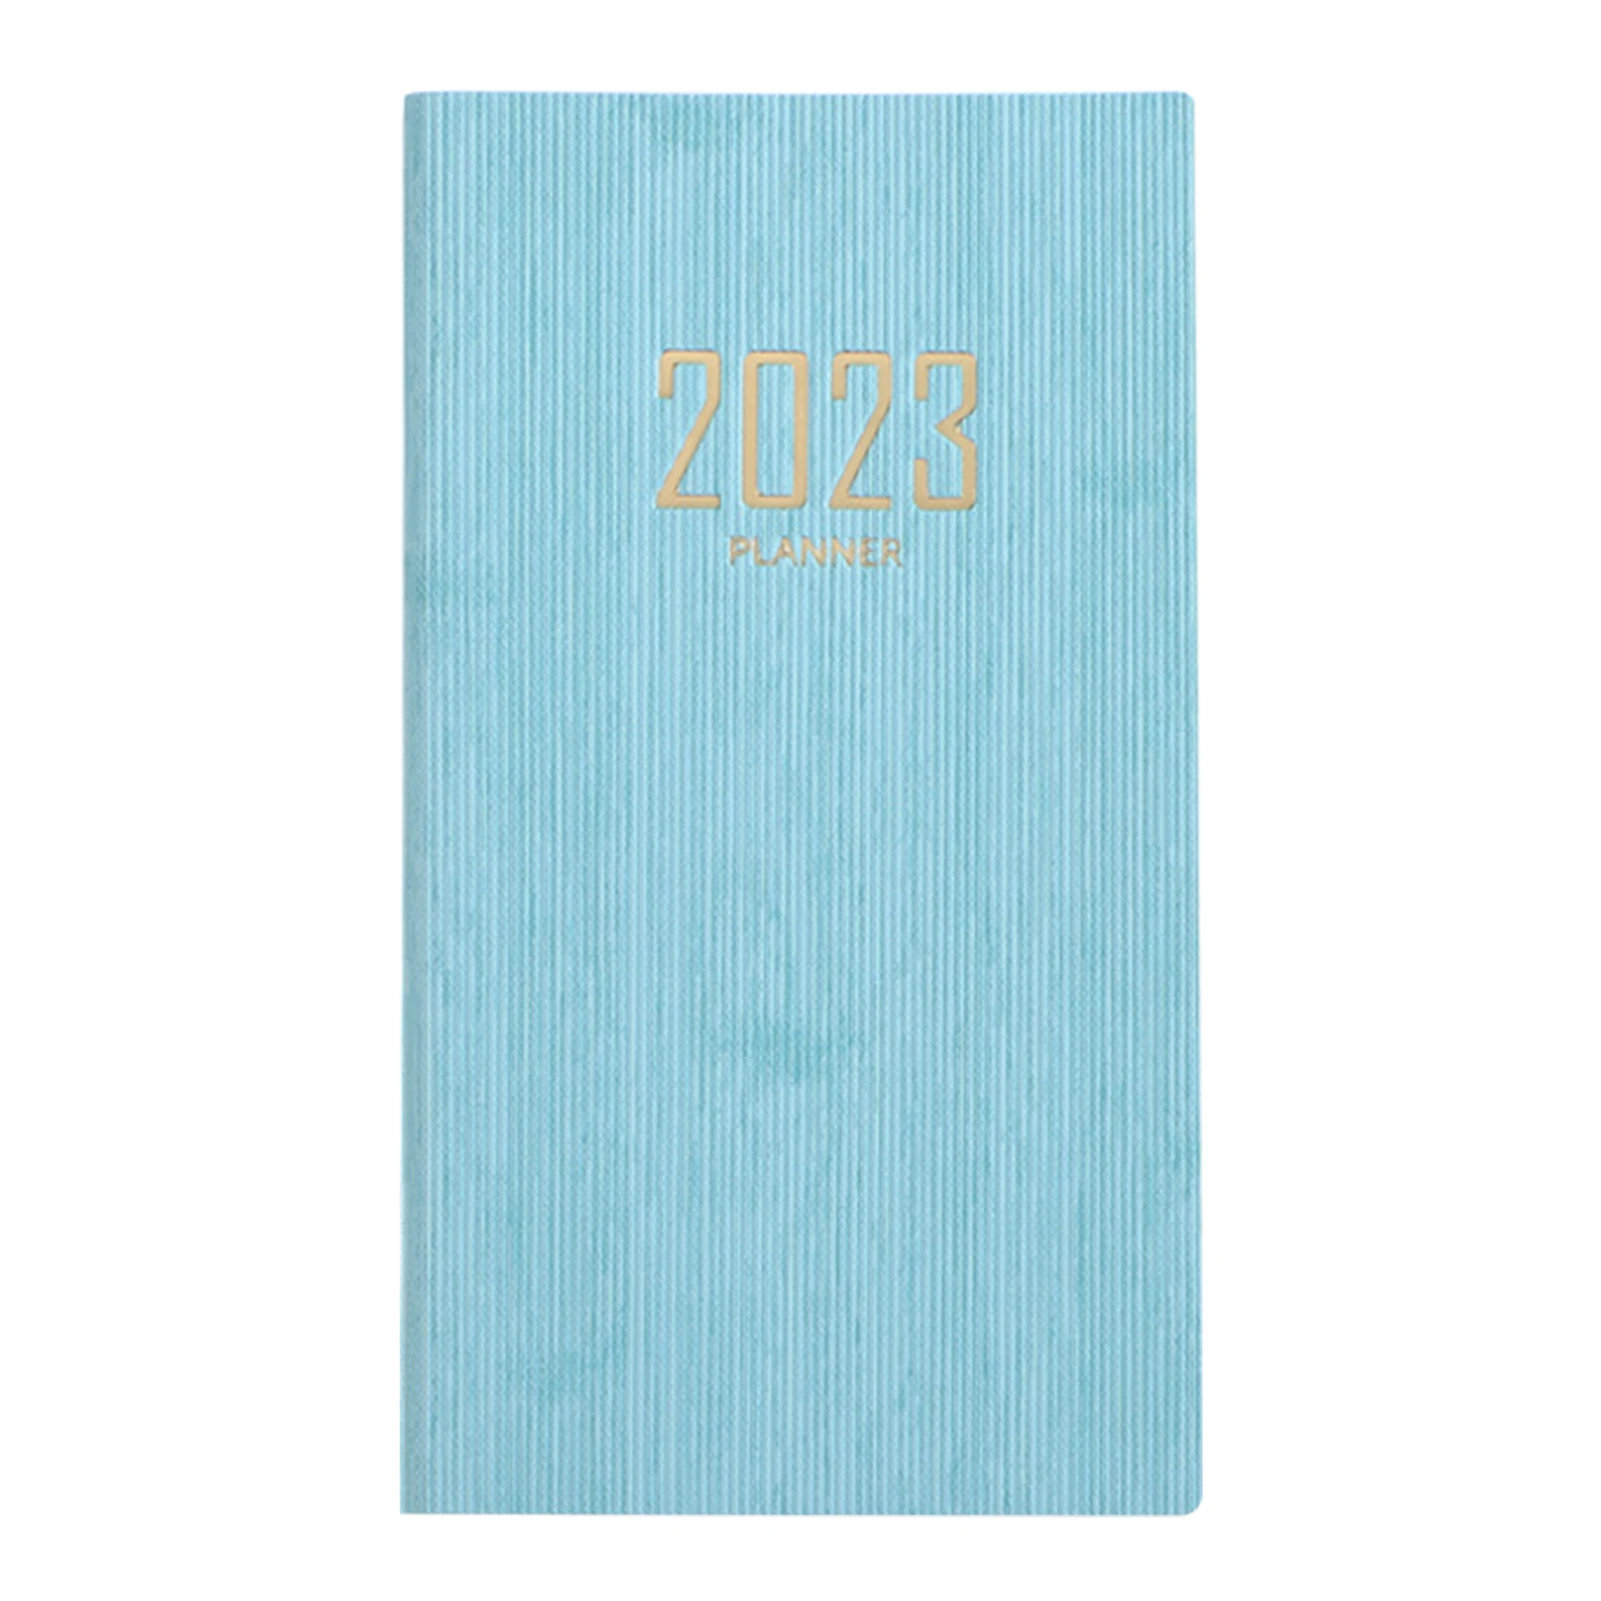 

A6 Home Office Portable Planner Book 120 Pages Christmas Daily Schedule Leather Cover Gift Pocket Diary Calendar Week To View